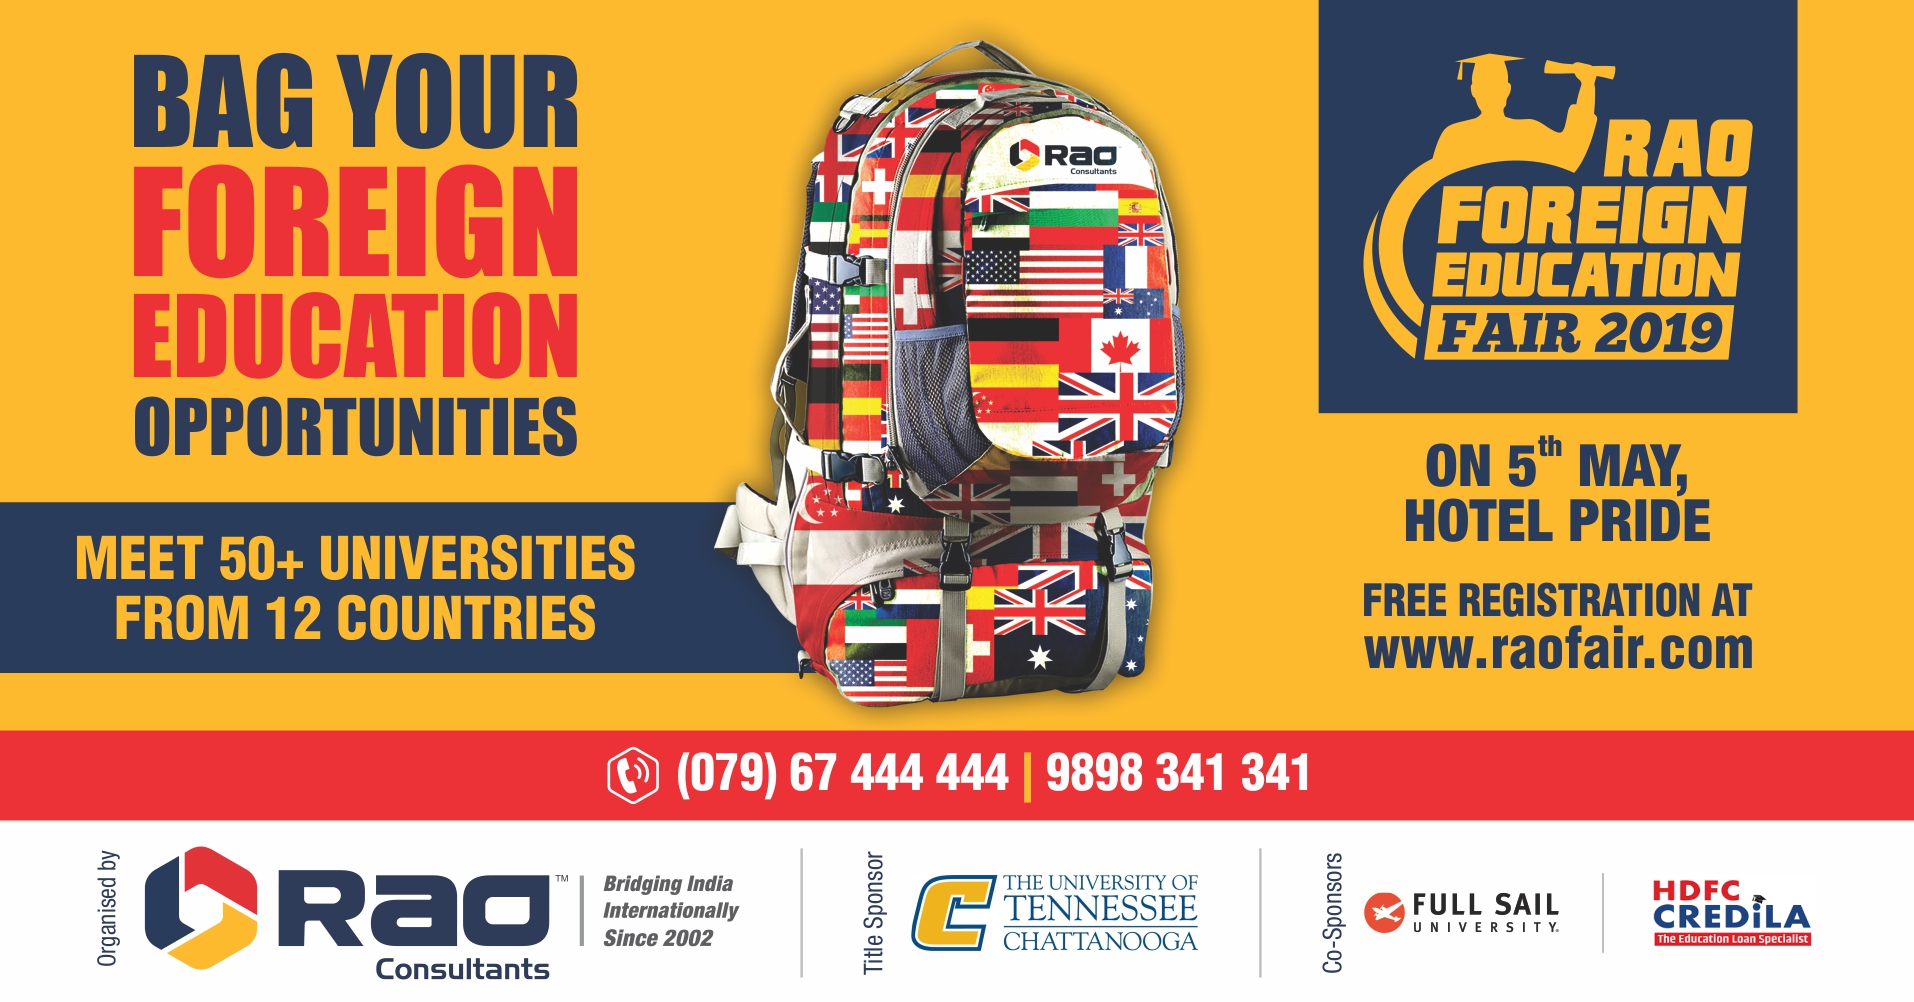 Looking for a Hassle-Free Visa & Immigration Service?